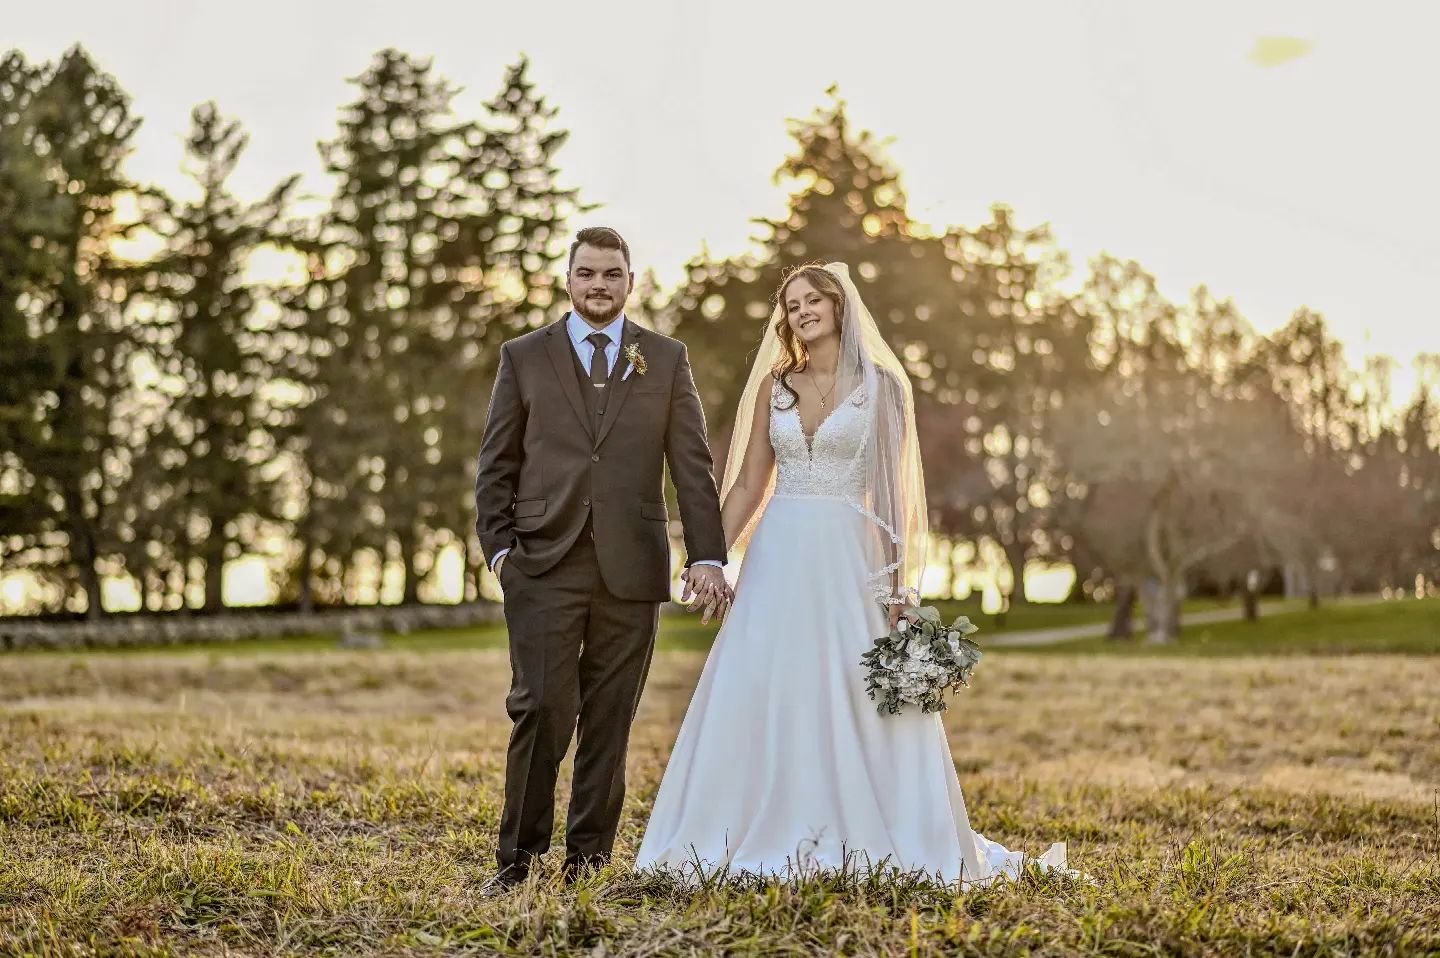 A little cold didn't stop these two from getting some amazing photos! 😍
#anthonytomassiphotography 
#bantamfirecompany 
#topsmeadstateforest 
#topsmeadstatepark 
#wedding
#weddingday 
#ctwedding 
#ctweddingday 
#Photography 
#Photographer 
#ctphotog